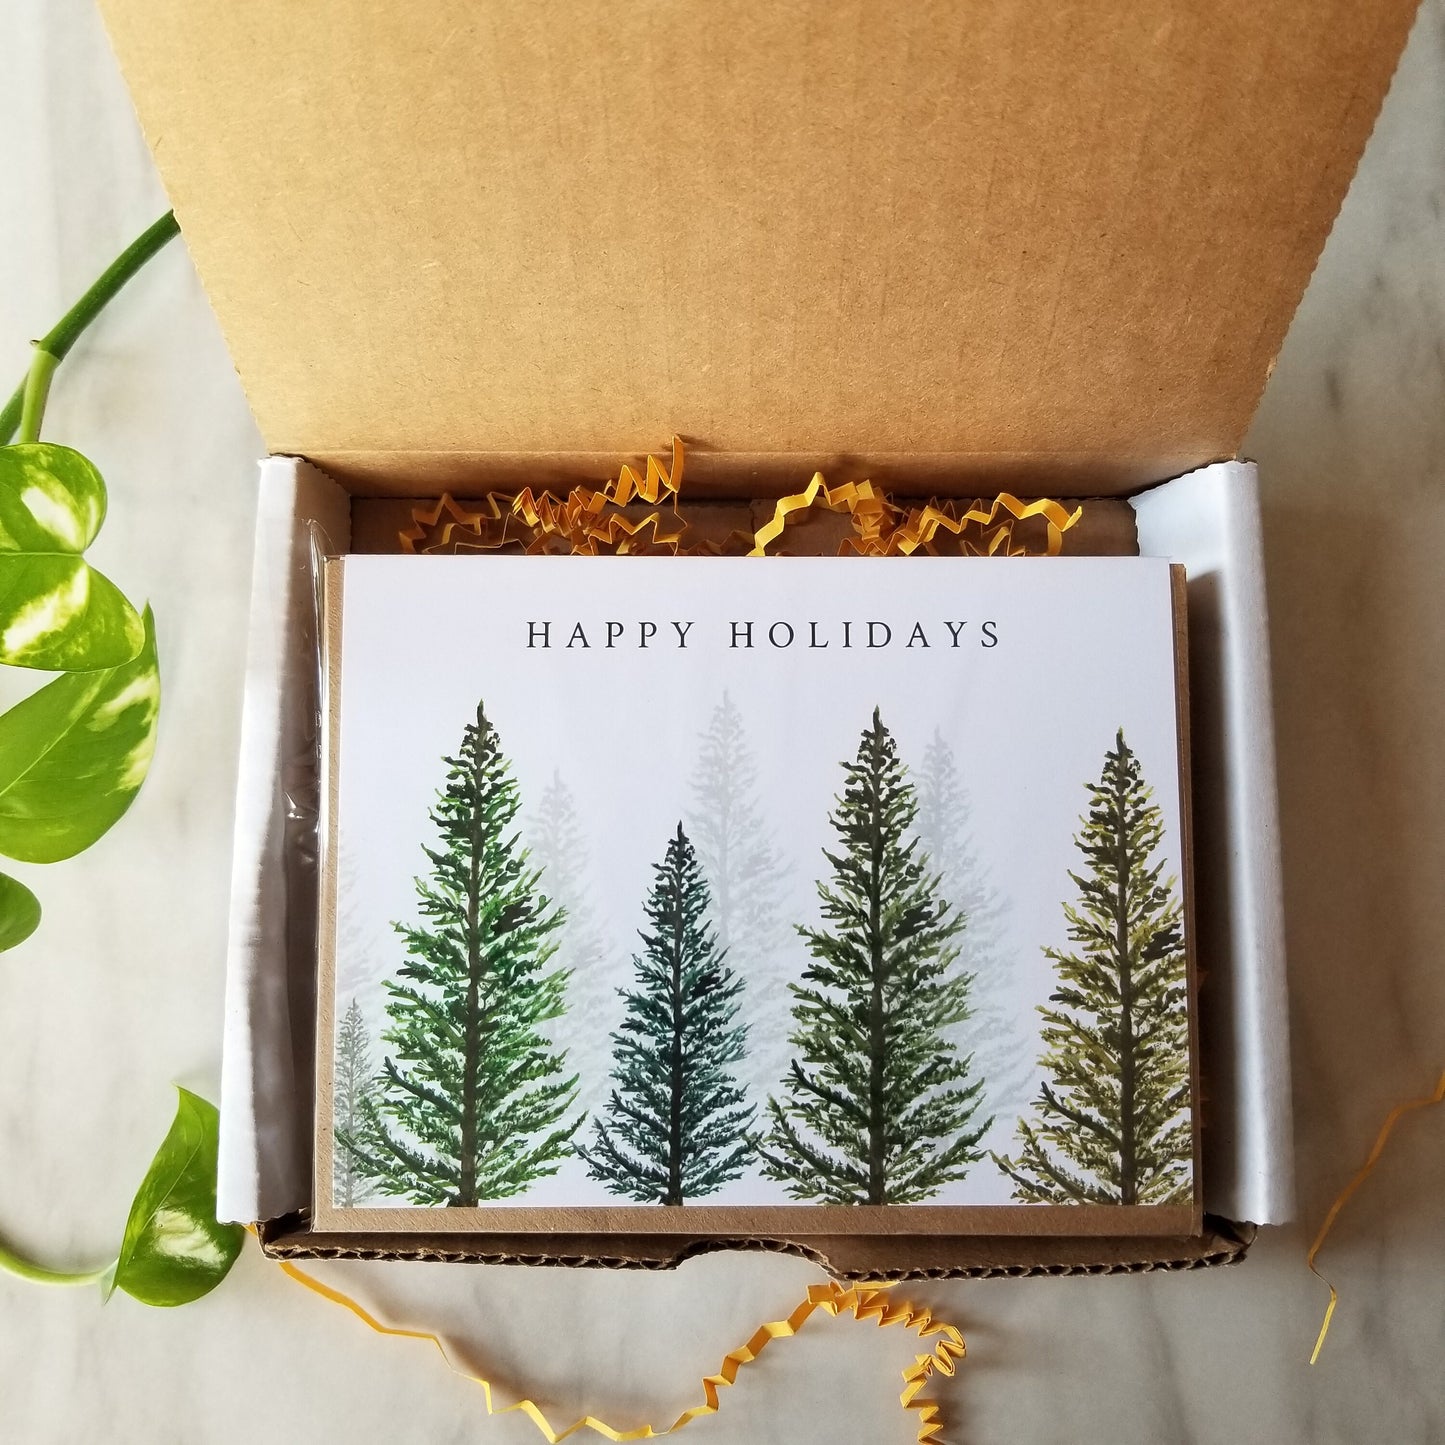 Pack of 350 custom Holiday Cards